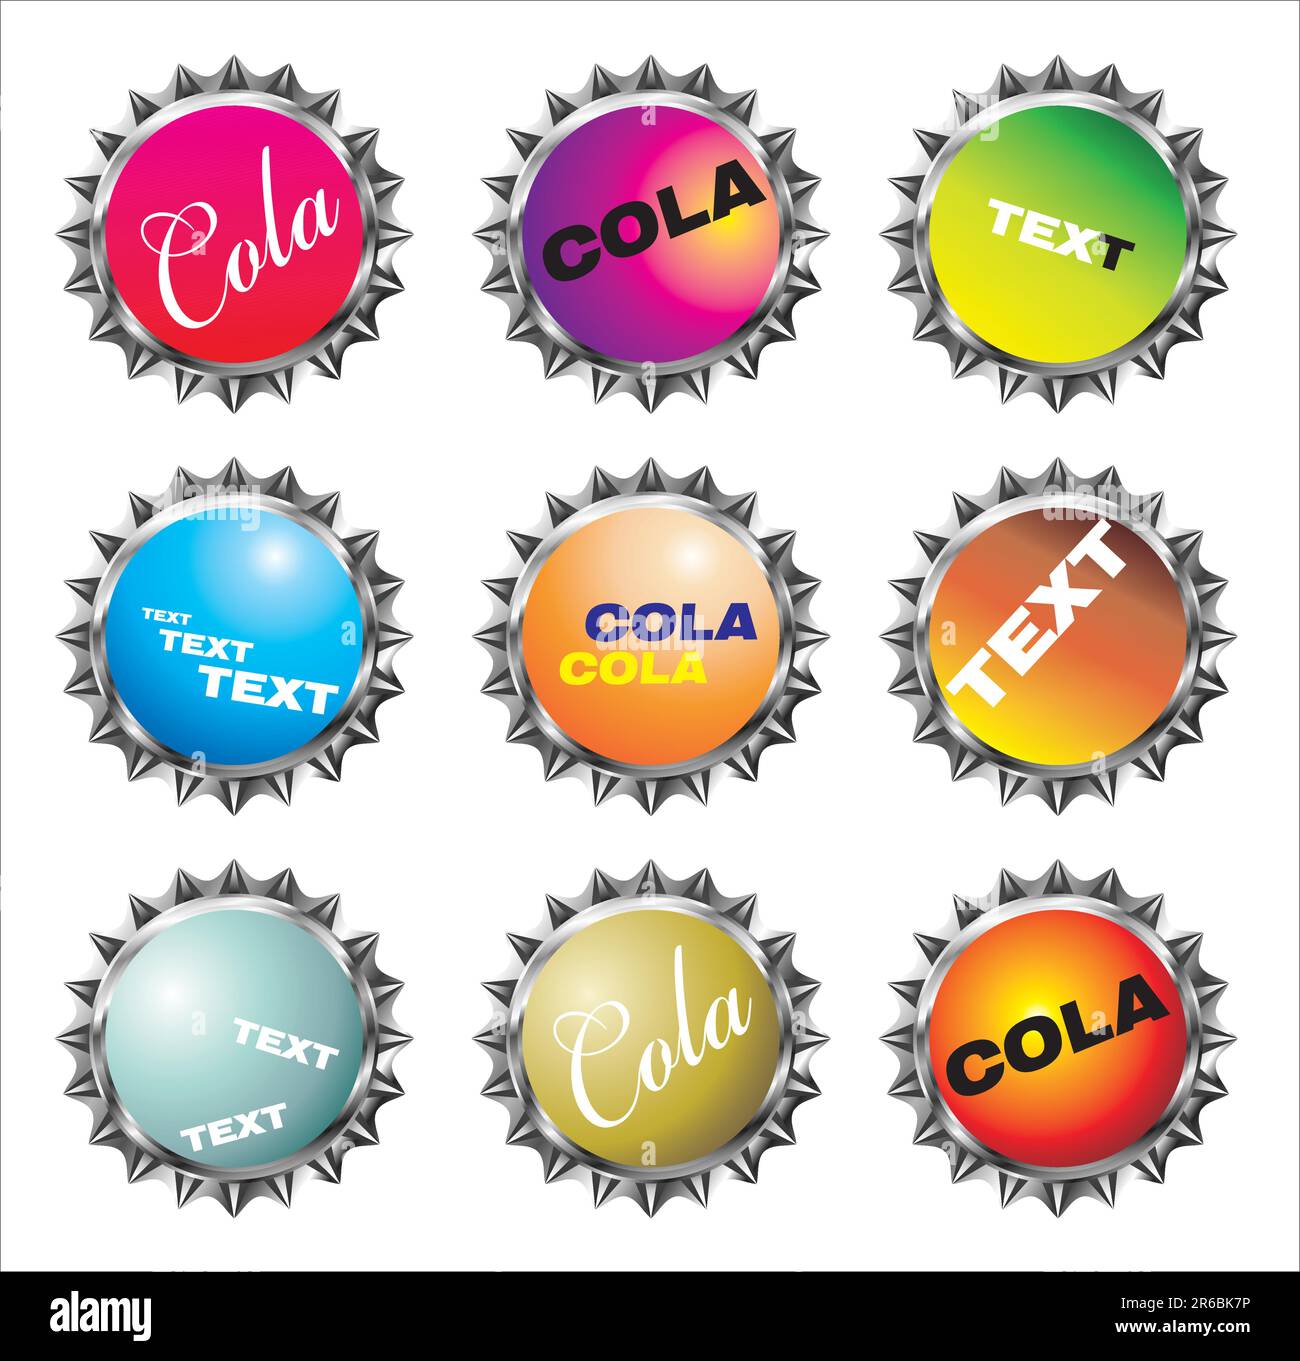 Little collections of bottle caps with various colorful designs Stock Vector